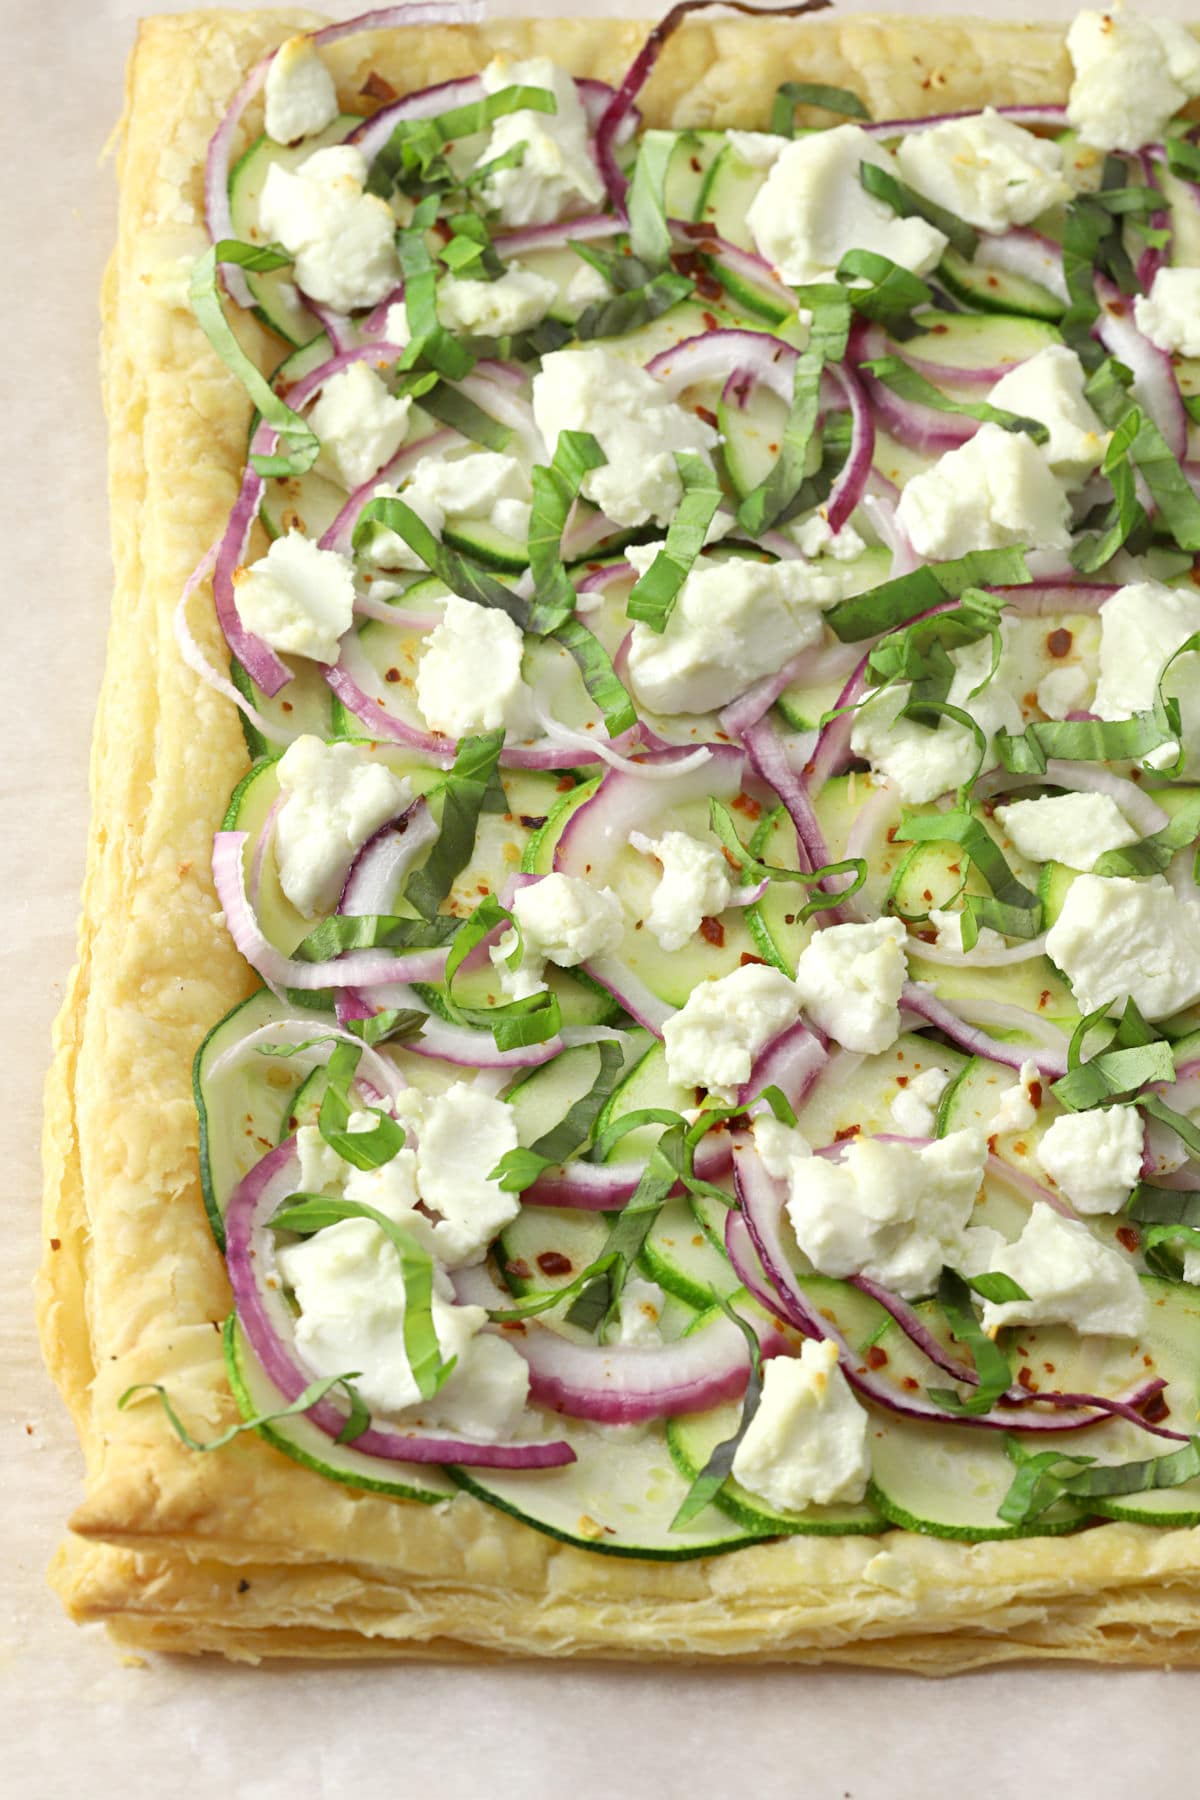 Puff pastry topped with zucchini, onions, and goat cheese.